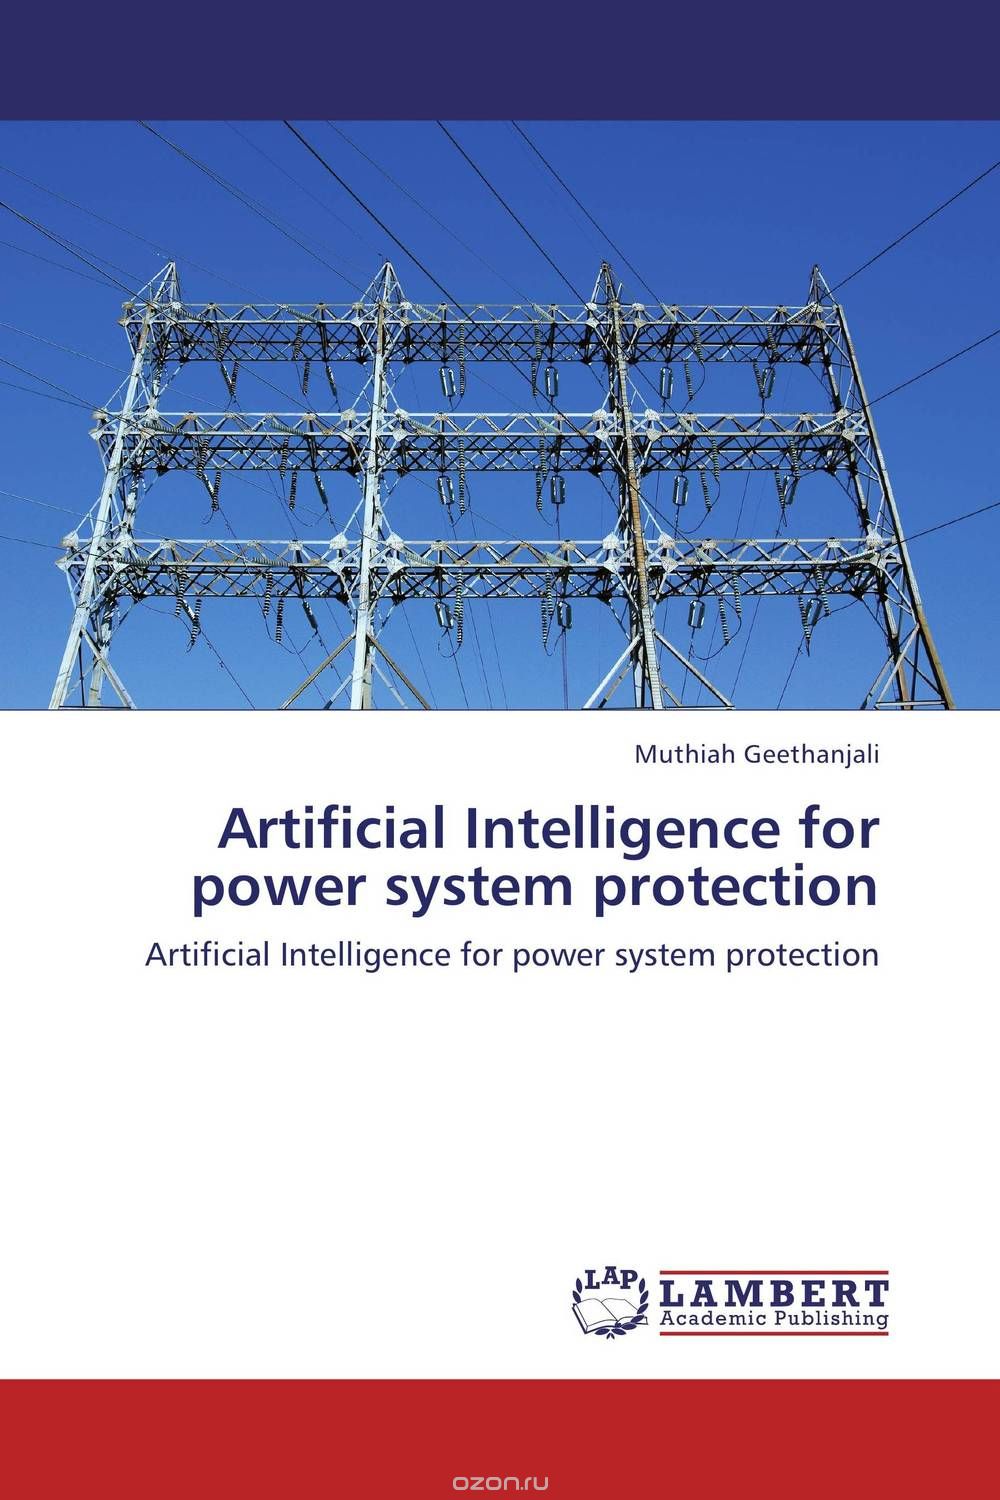 Artificial Intelligence for power system protection